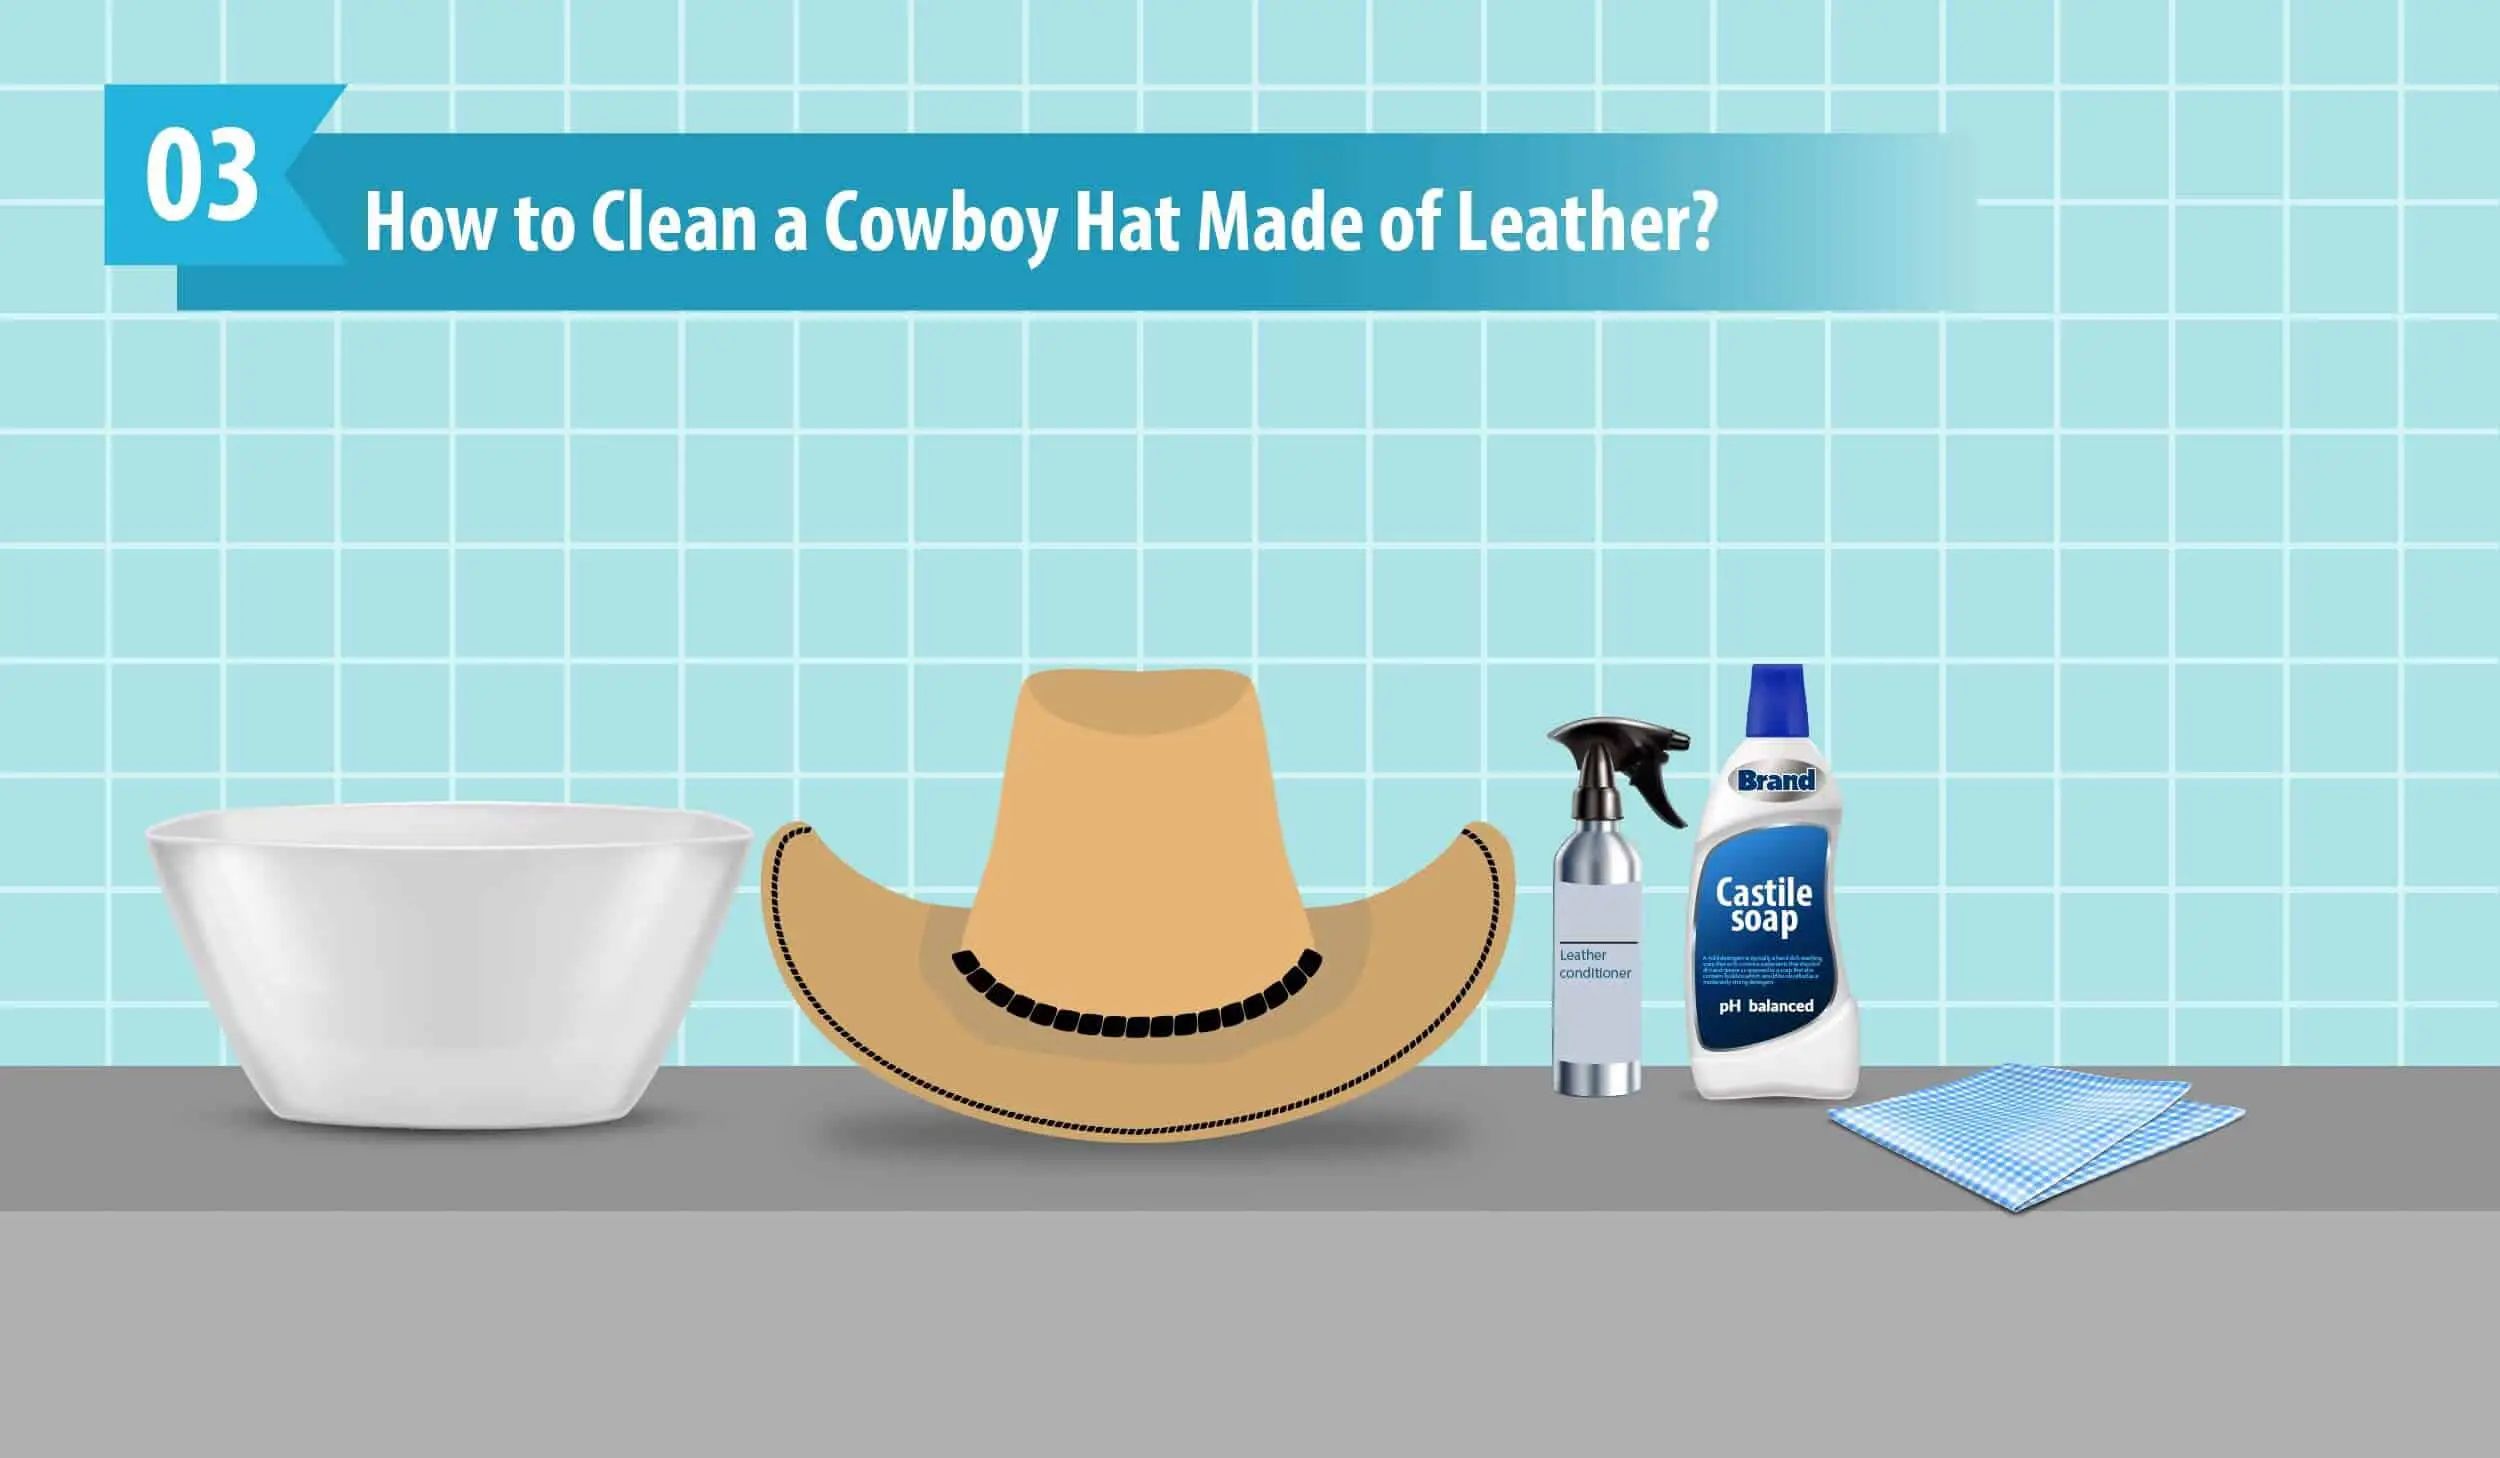 How to Clean a Cowboy Hat Made of Leather